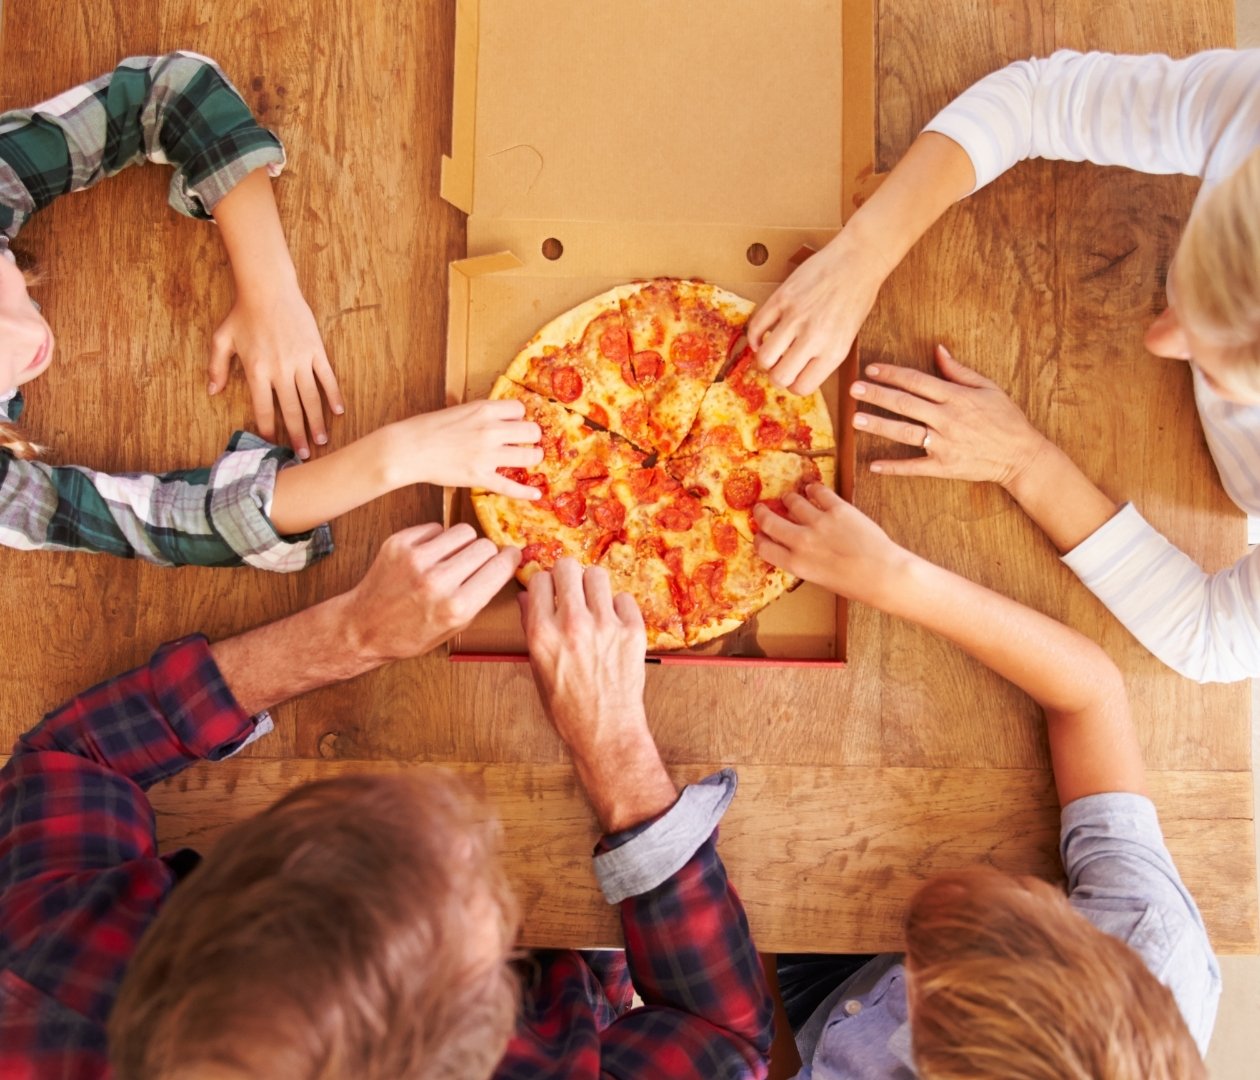 Hands reaching for a pizza